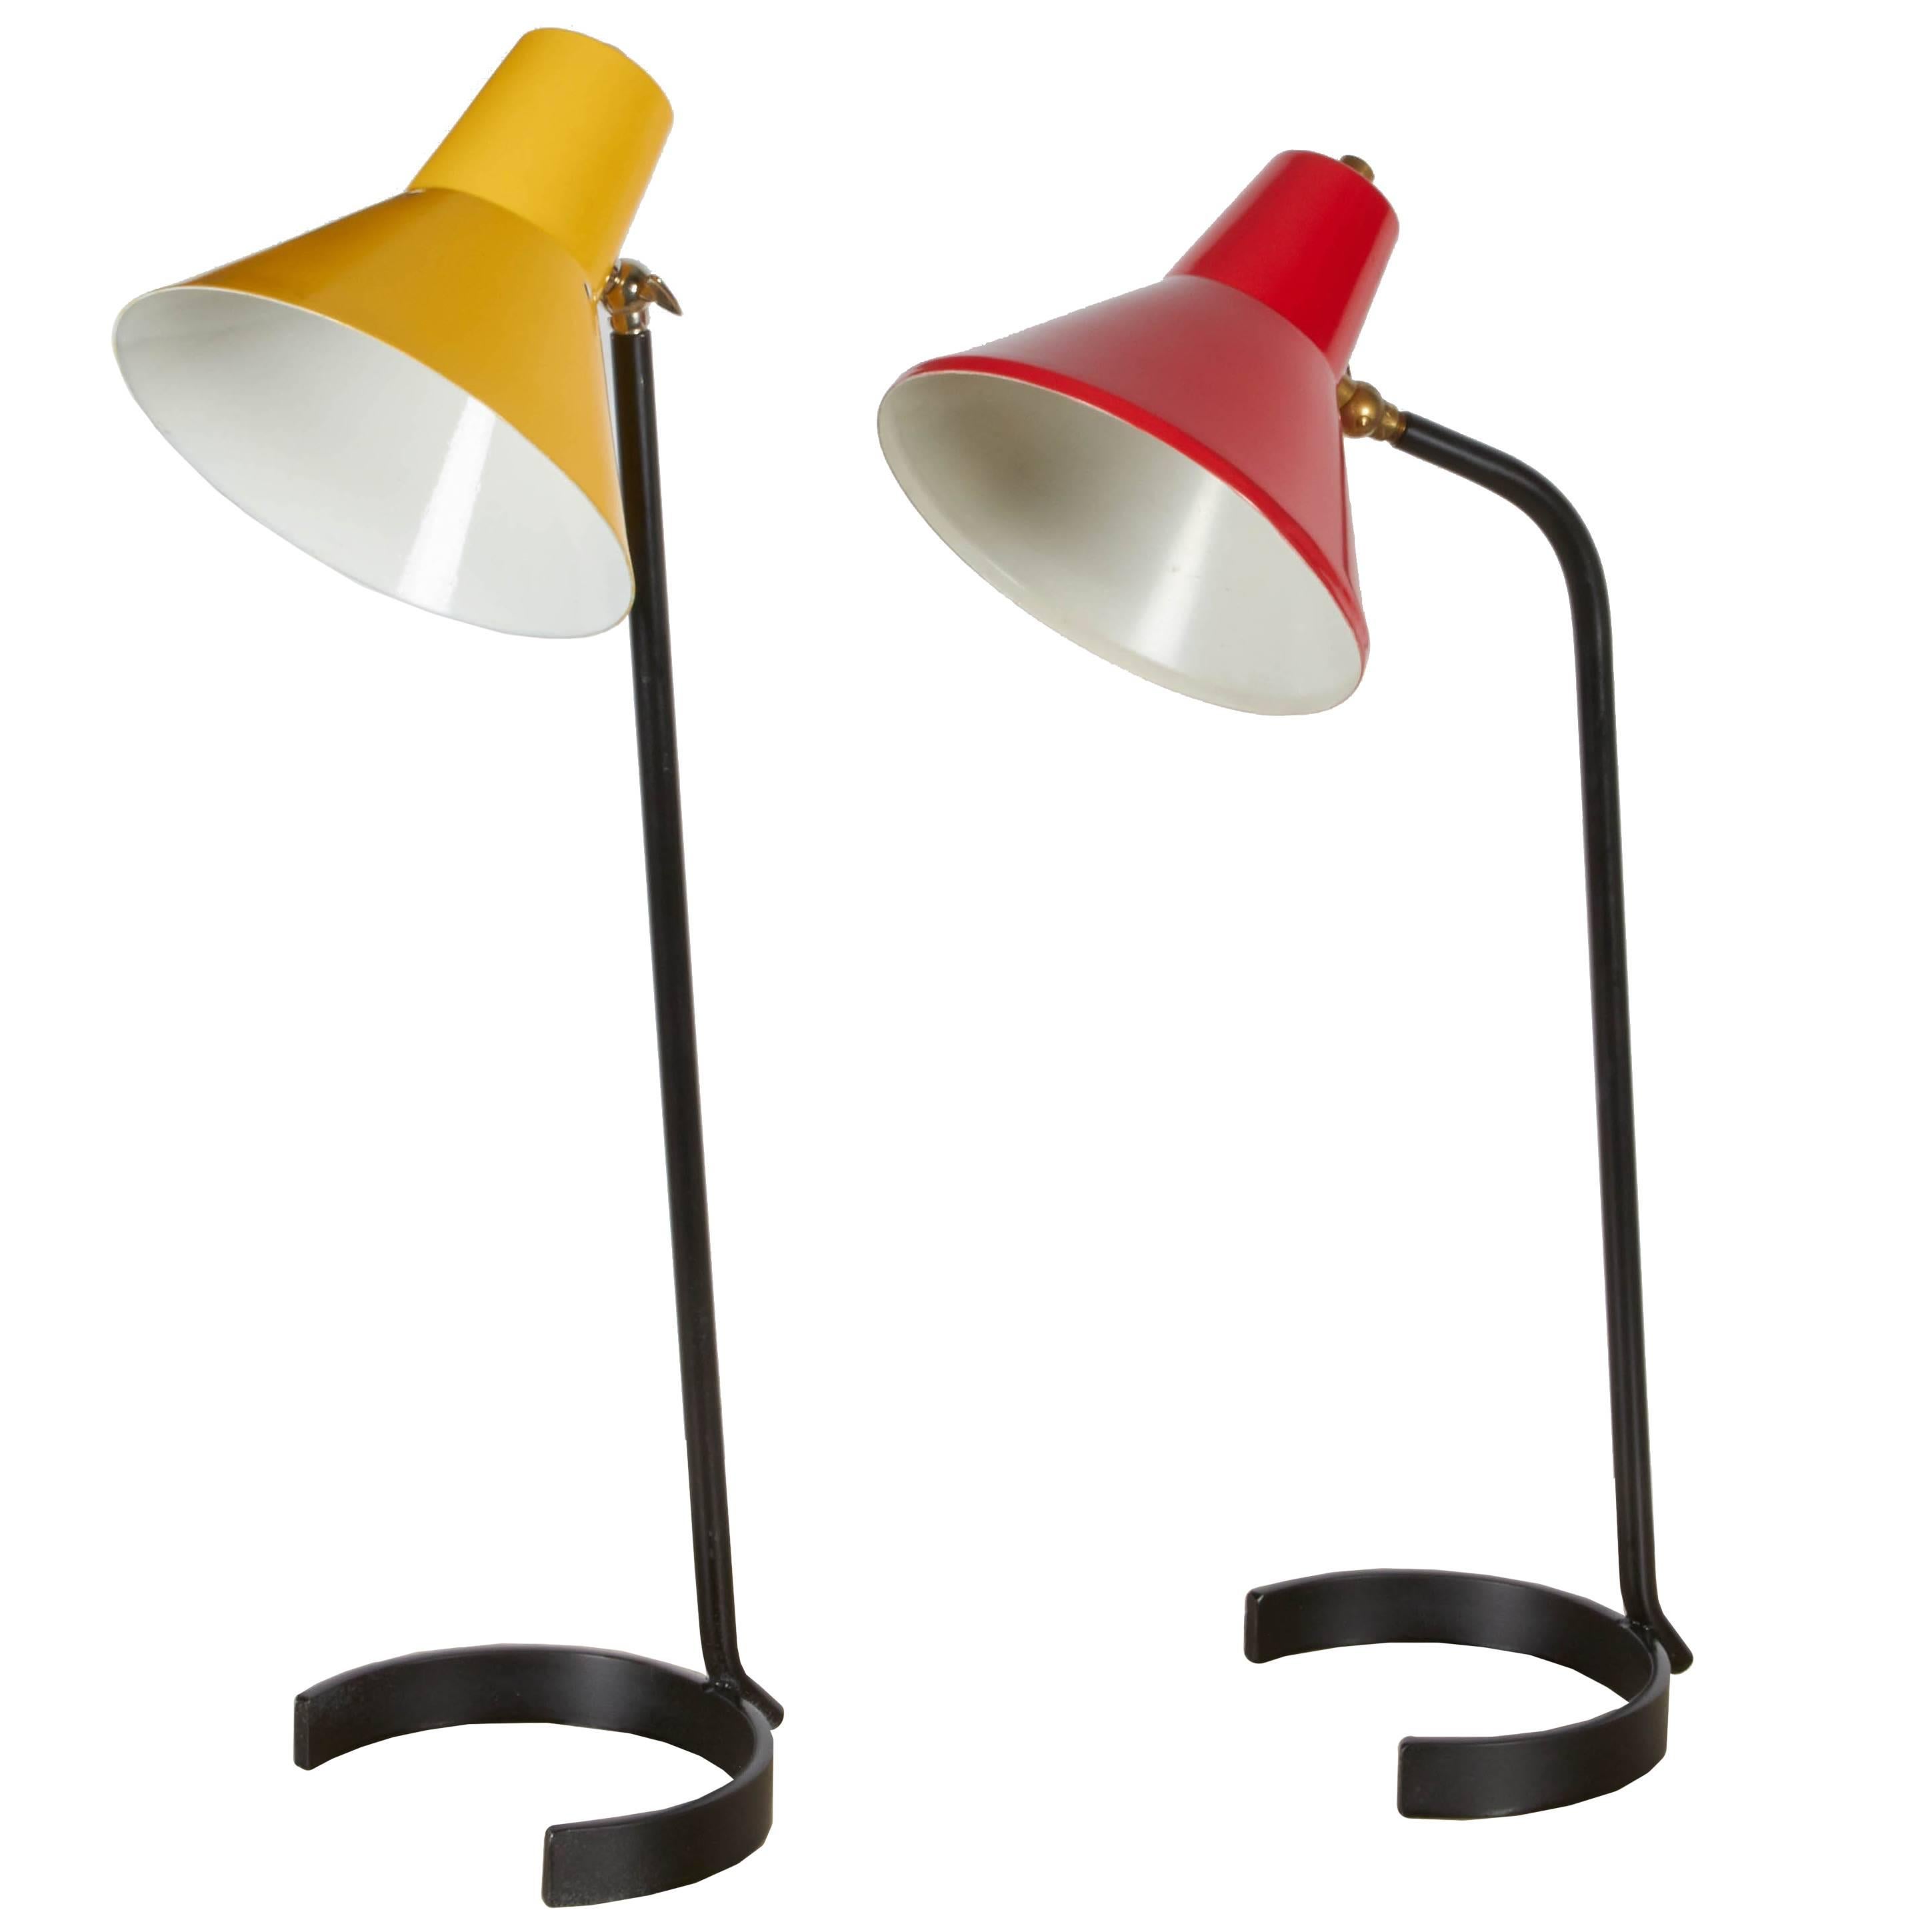 Two Iron and Steel Desk Lamps by JJM Hoogervorst for Anvia, 1960s